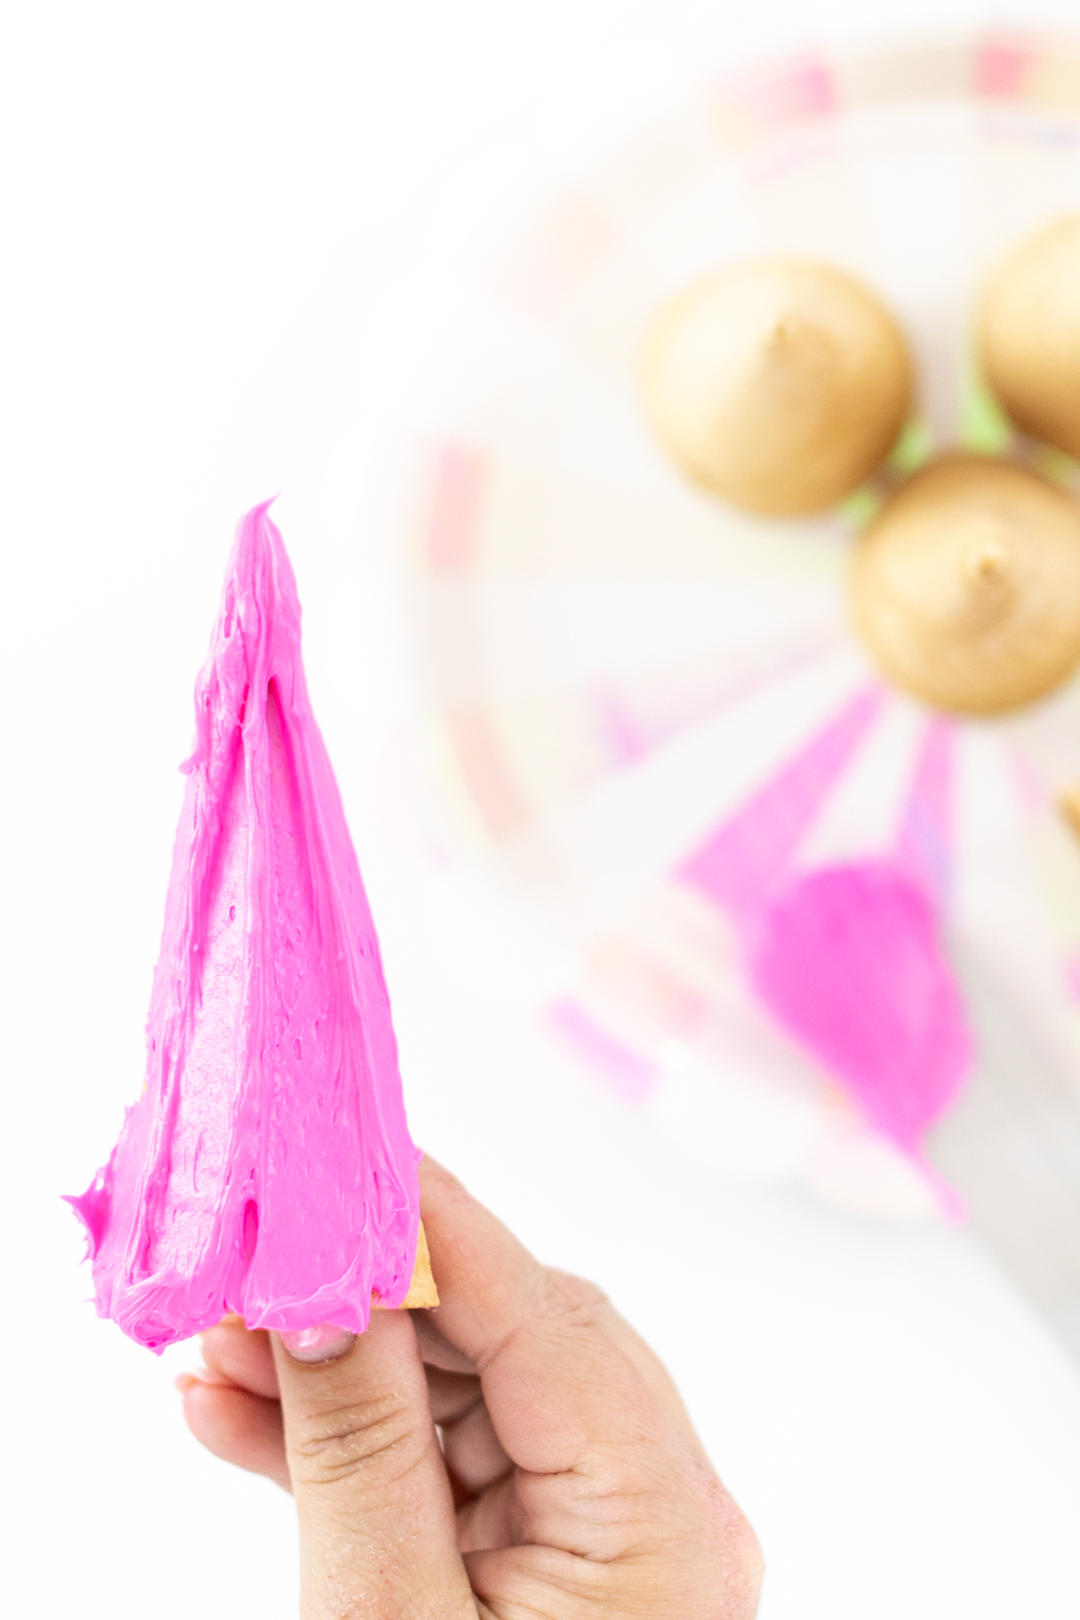 Pink frosting on ice cream cone